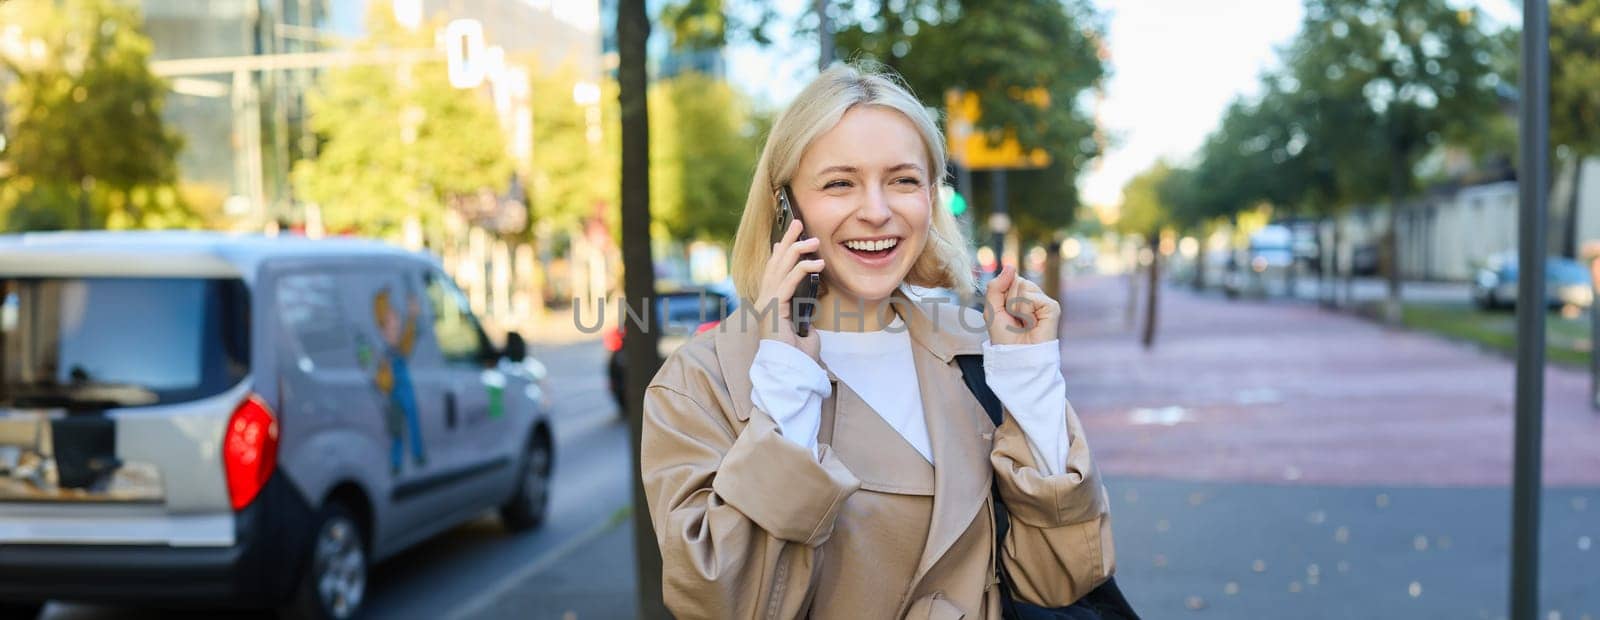 Portrait of cheerful girl talking on mobile phone, laughing while walking along the street, has backpack on shoulder. Lifestyle and people concept